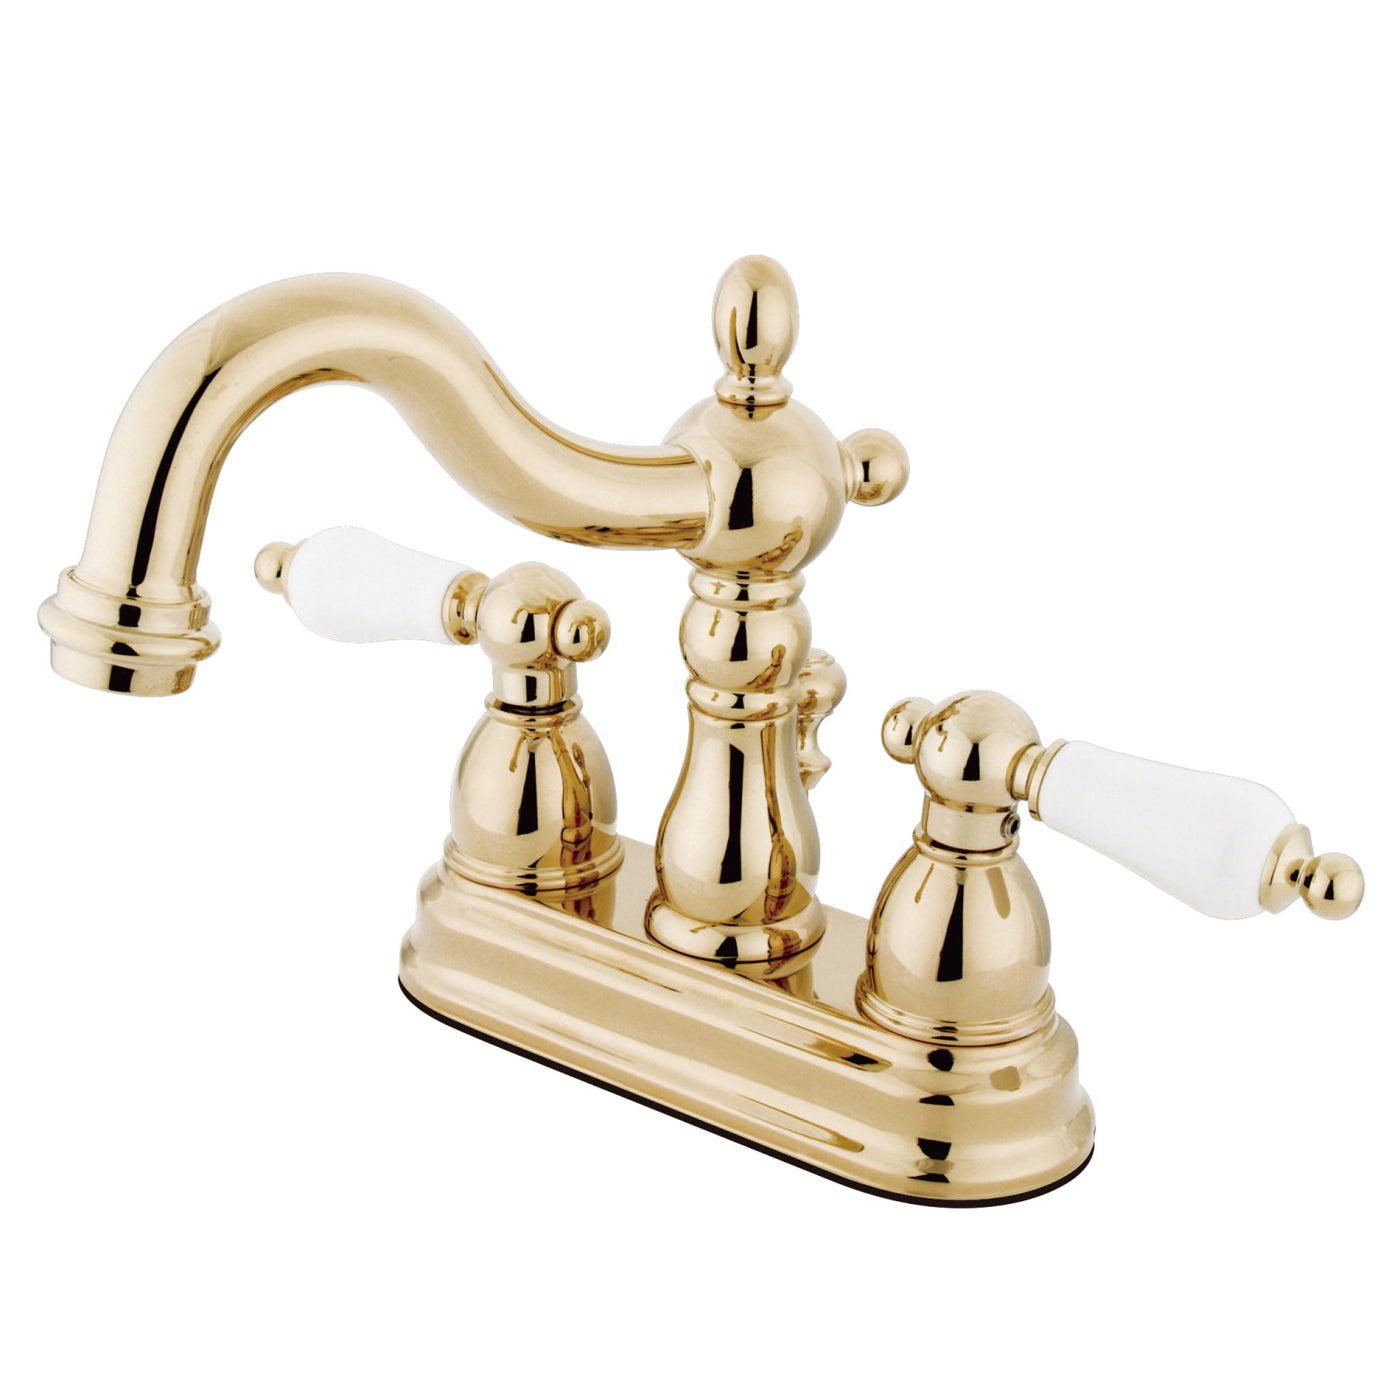 Elements of Design EB1602PL 4-Inch Centerset Bathroom Faucet with Plastic Pop-Up, Polished Brass